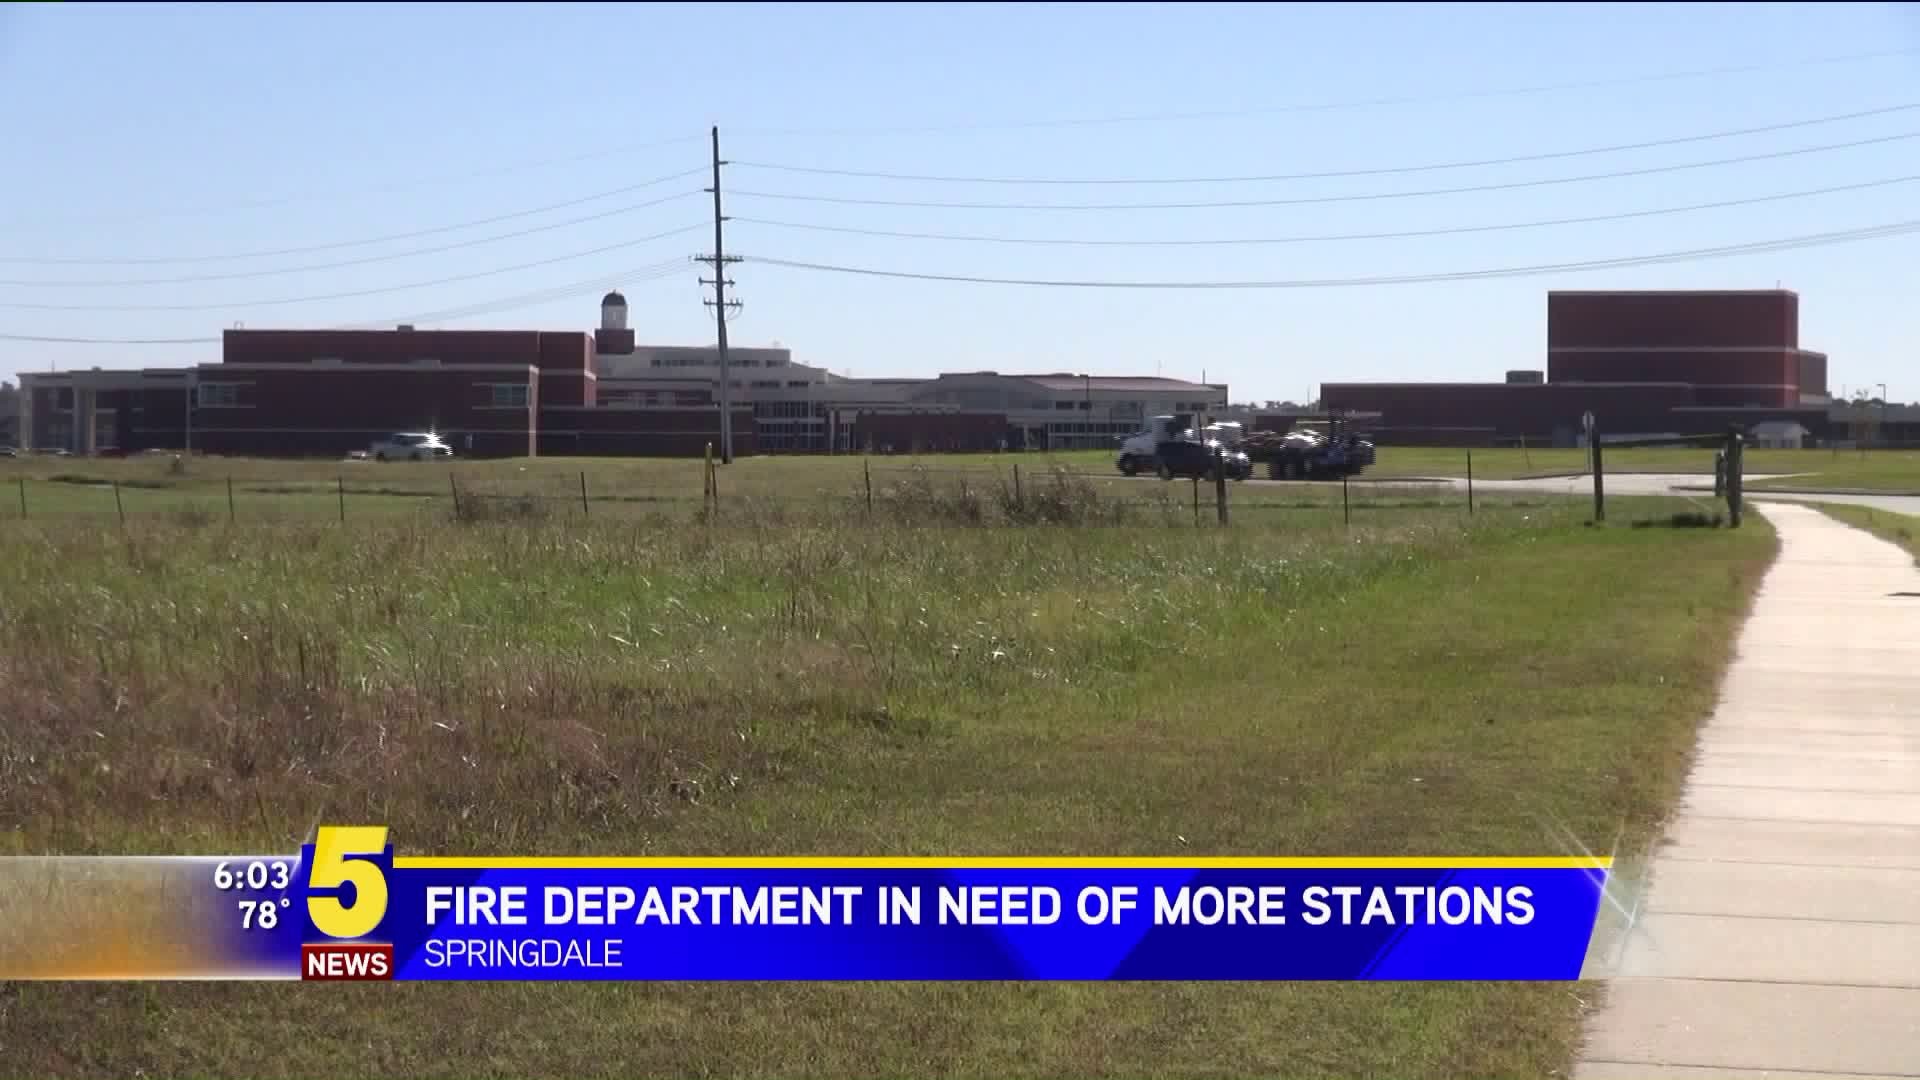 Fire Department In Need Of More Stations